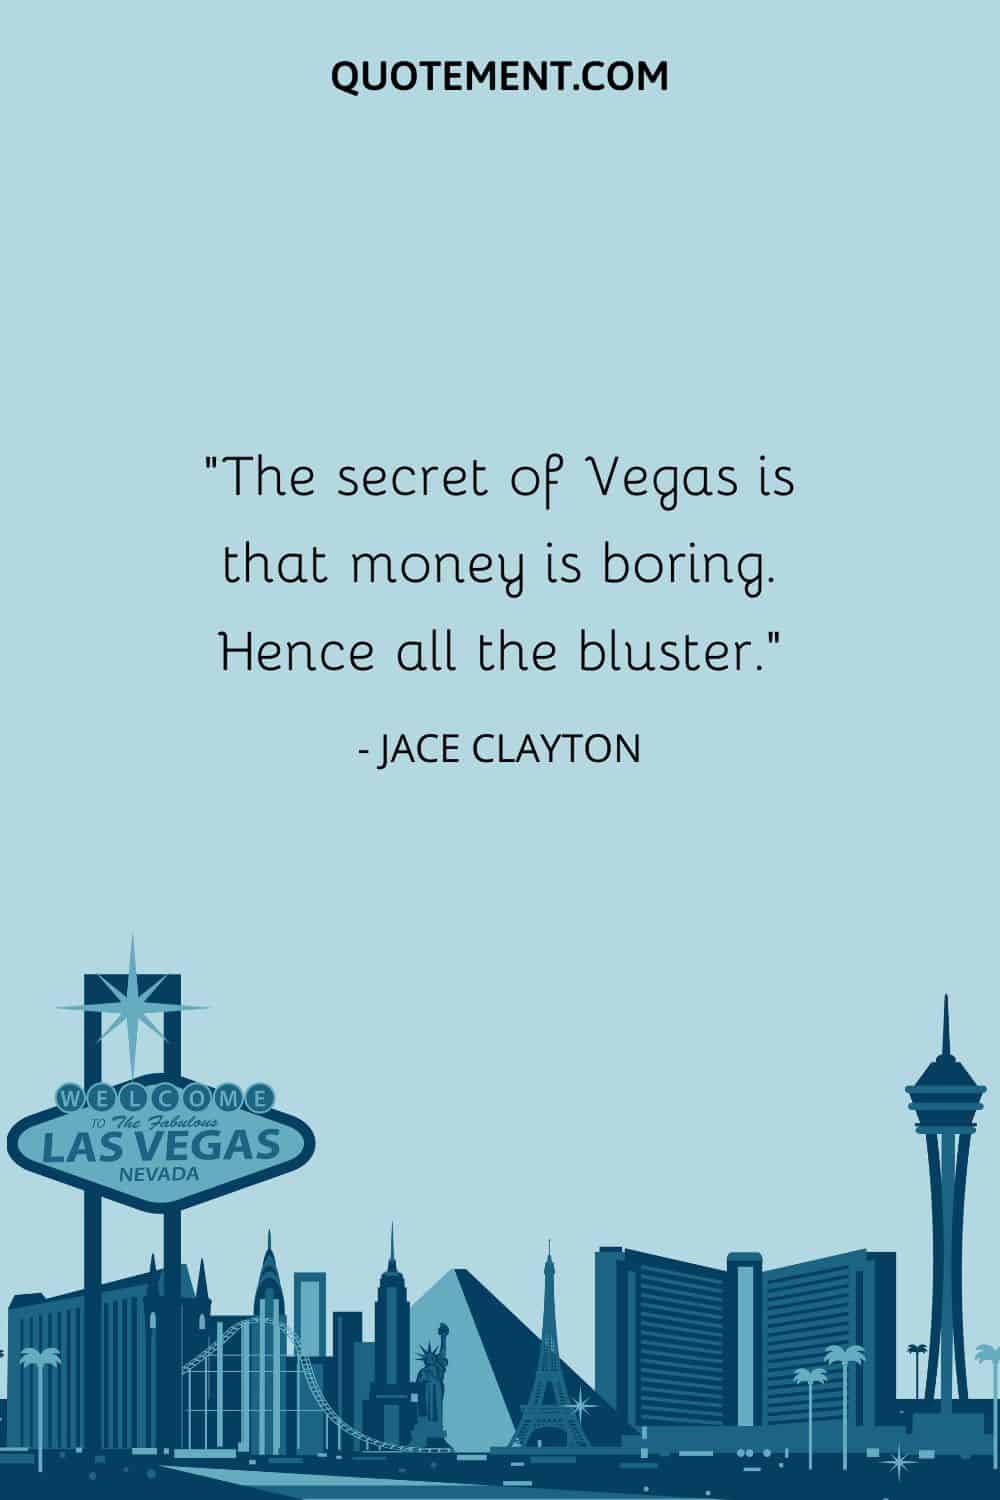 “The secret of Vegas is that money is boring. Hence all the bluster.” — Jace Clayton